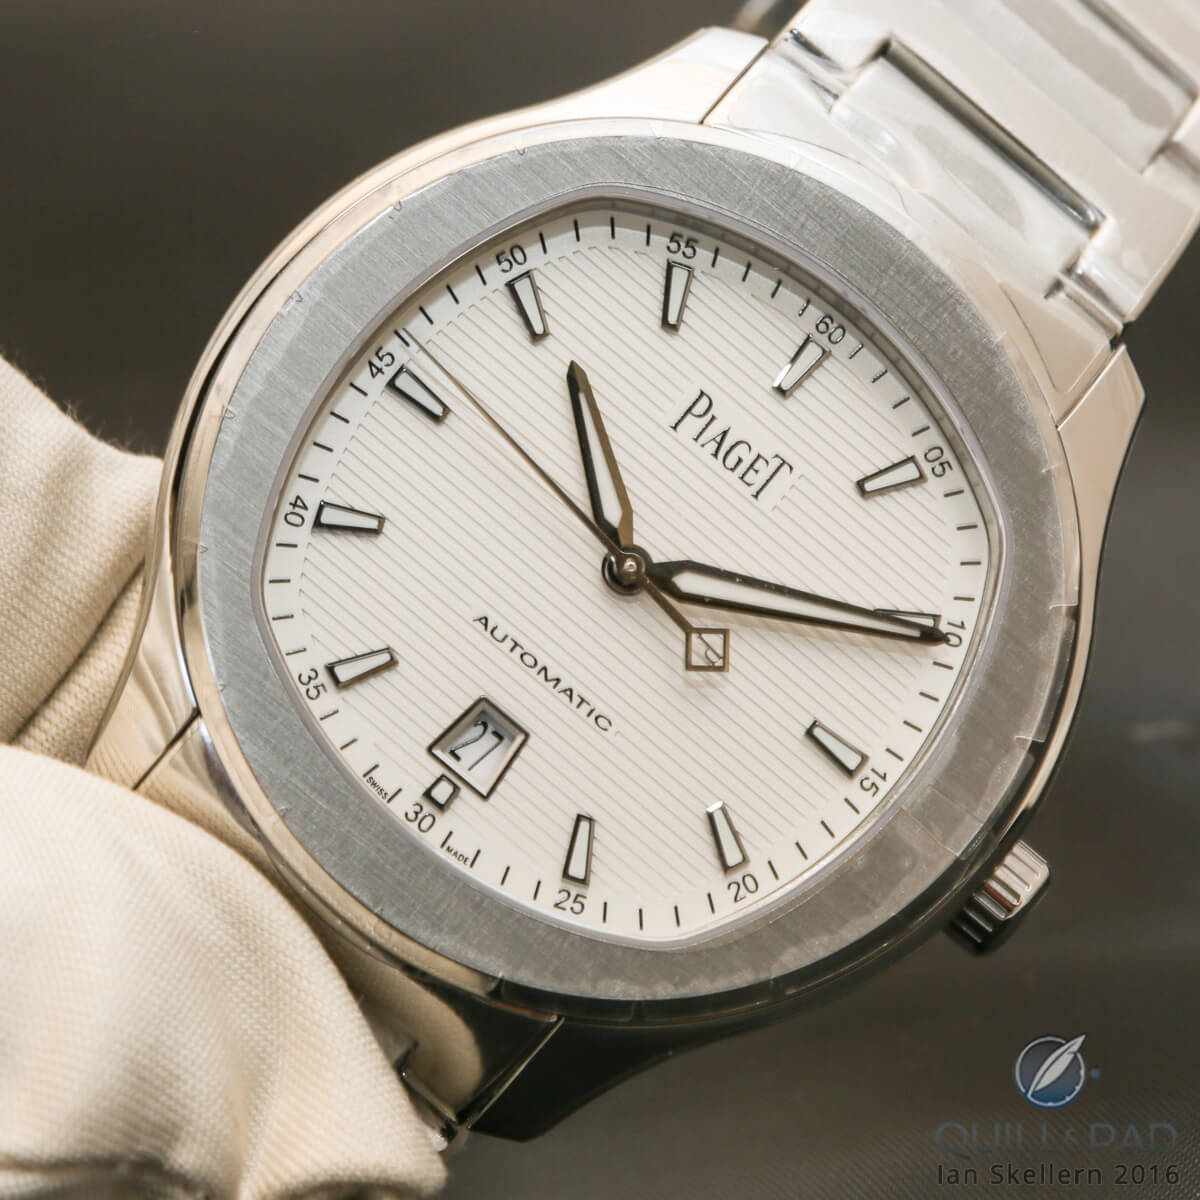 Piaget Polo S time only